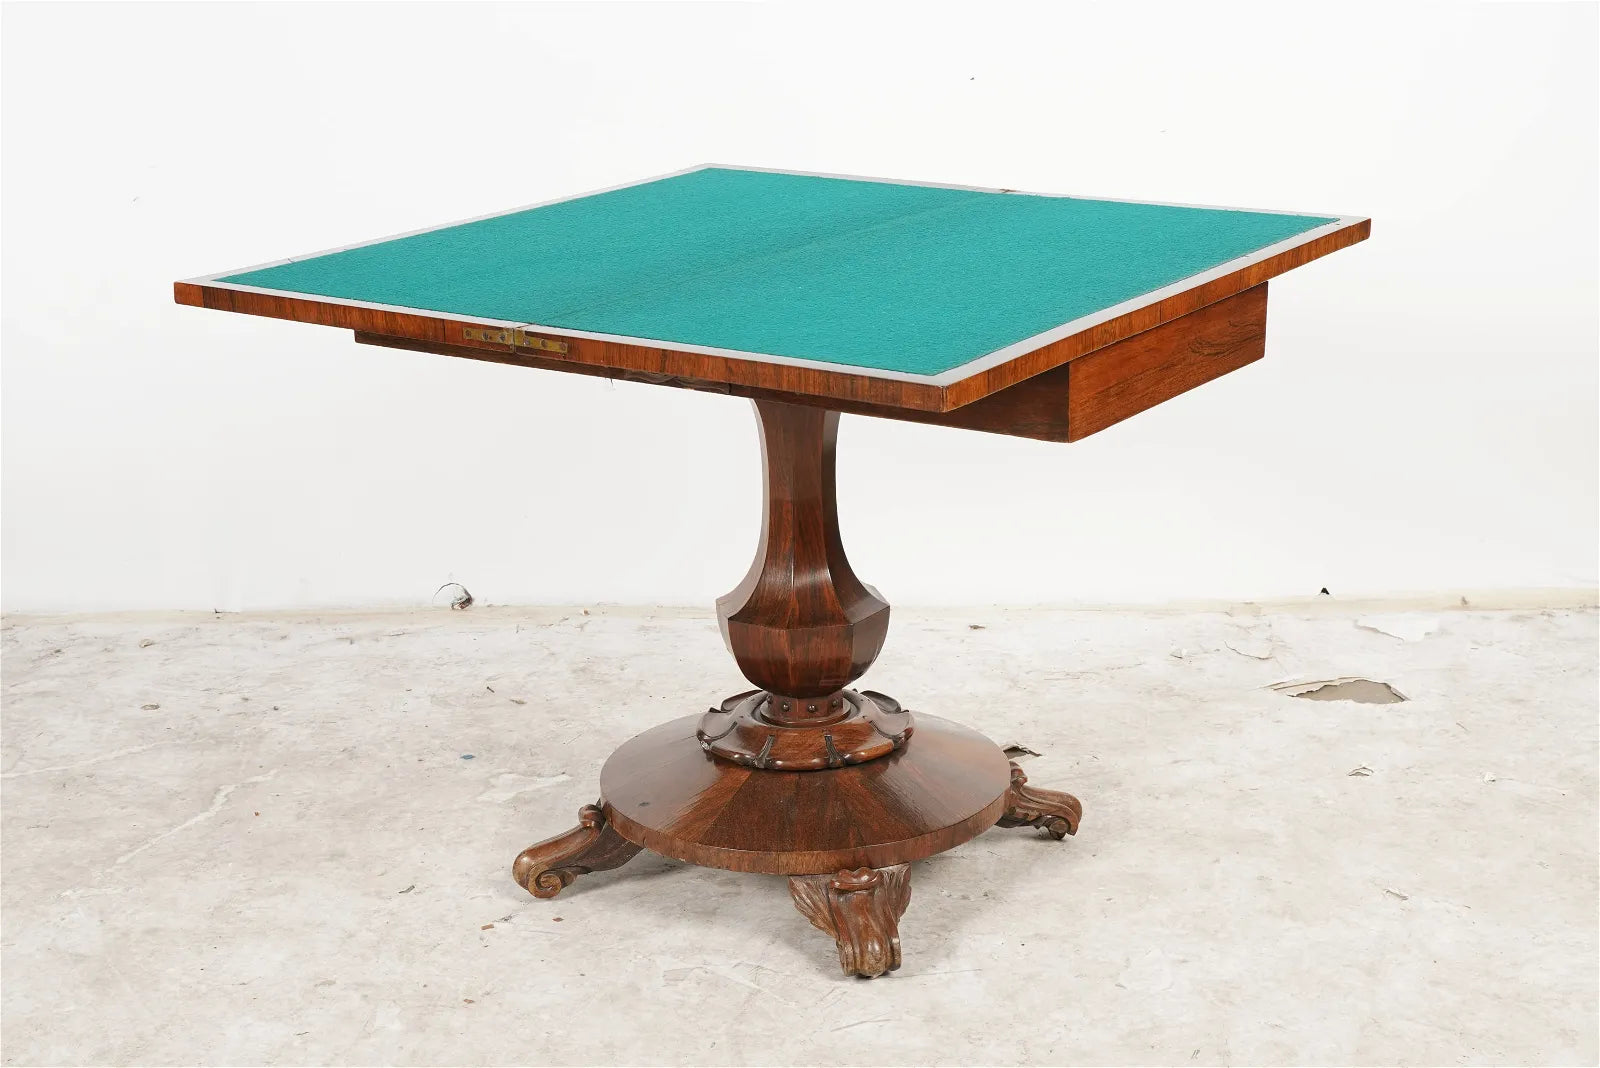 AF1-394: Antique Early 19th C English Regency Rosewood Flip Top Game Table